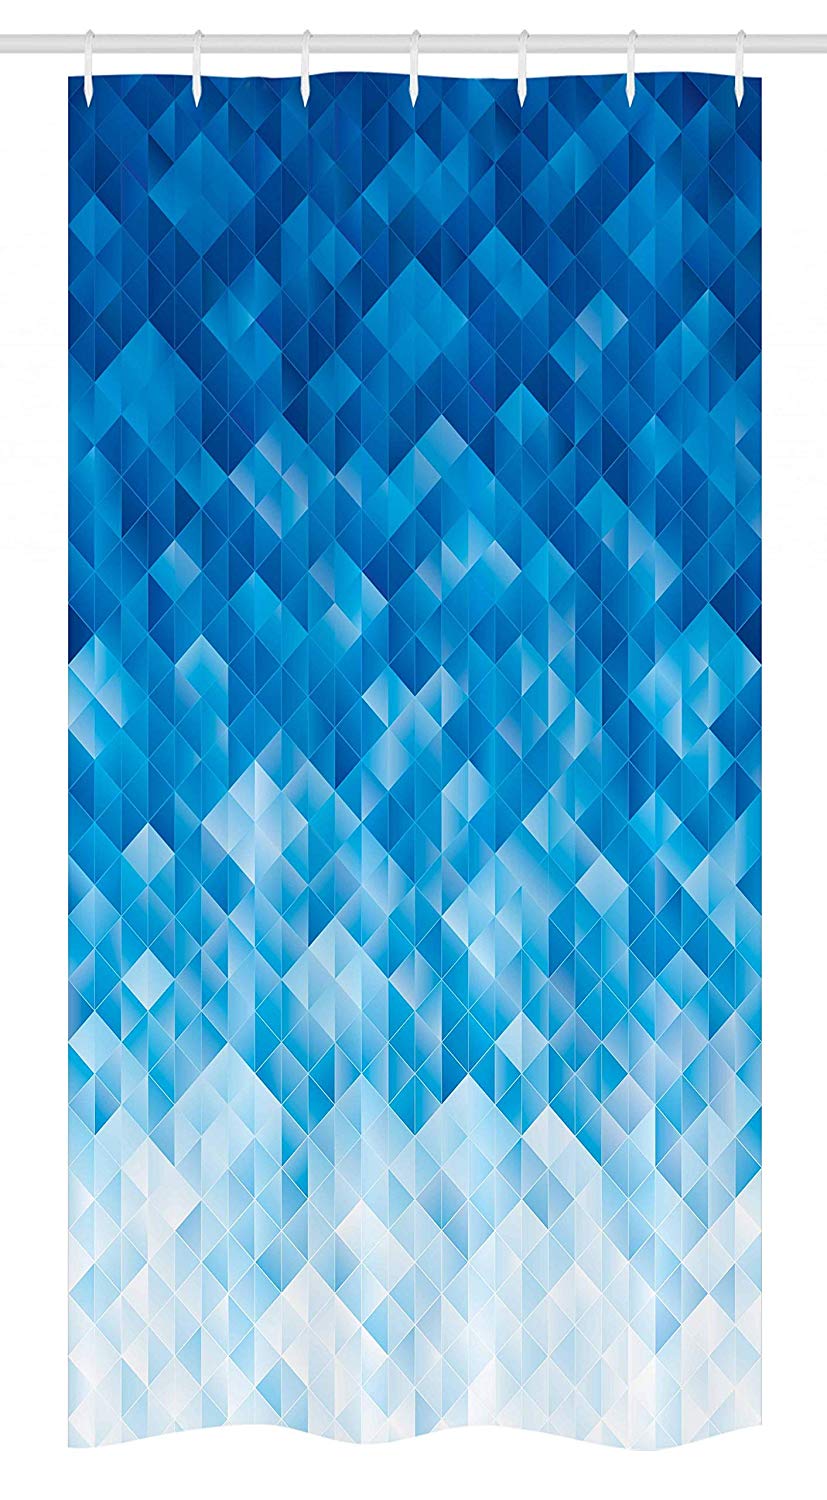 Ambesonne Geometric Stall Shower Curtain, Geometric Gradient Digital Texture with Mosaic Triangle Pixel Graphic Print Art, Fabric Bathroom Decor Set with Hooks, 36 W x 72 L inches, Light Blue